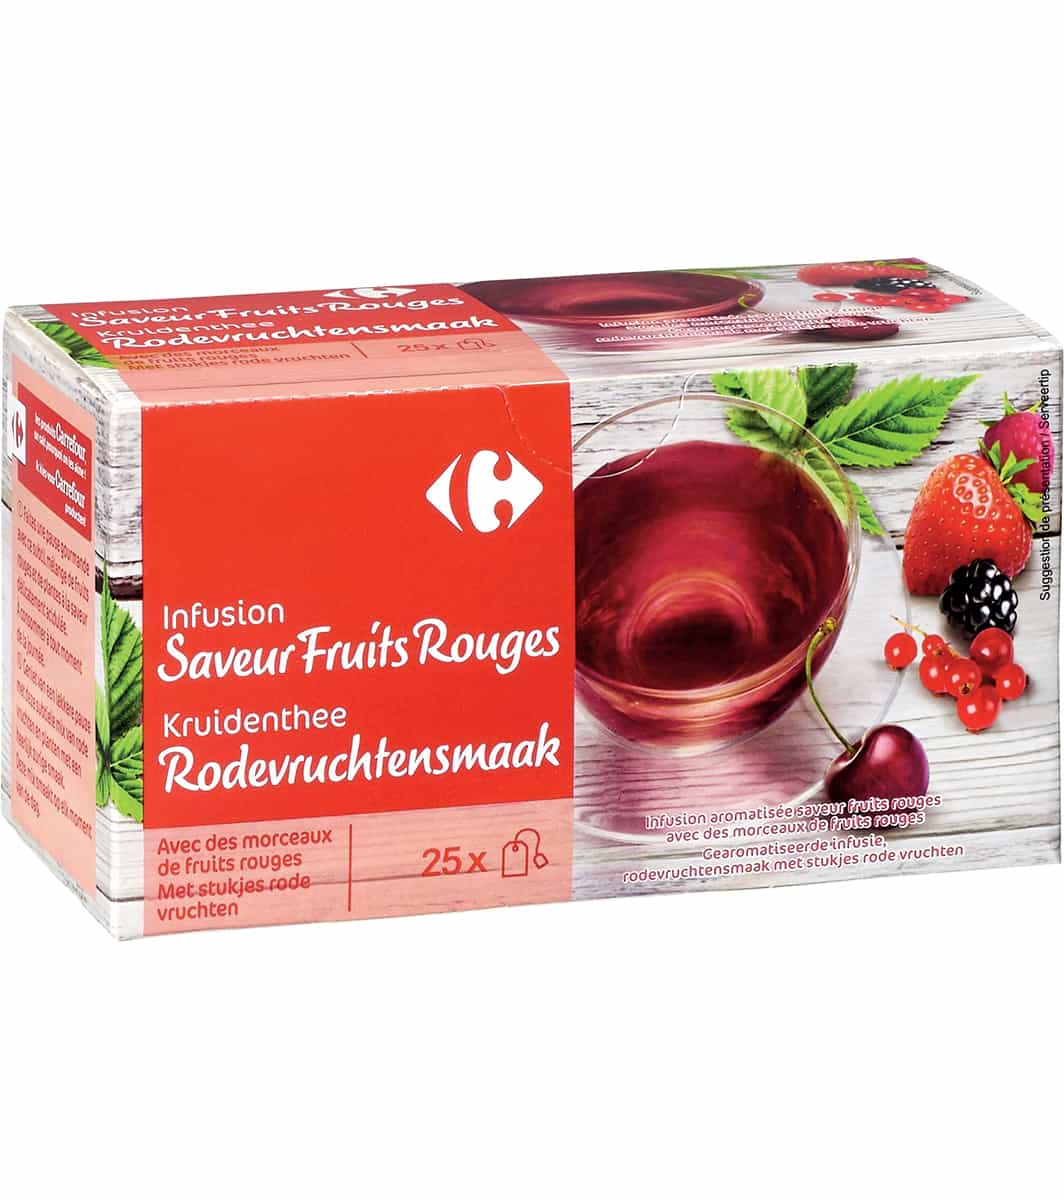 Fruits rouges (Infusion)